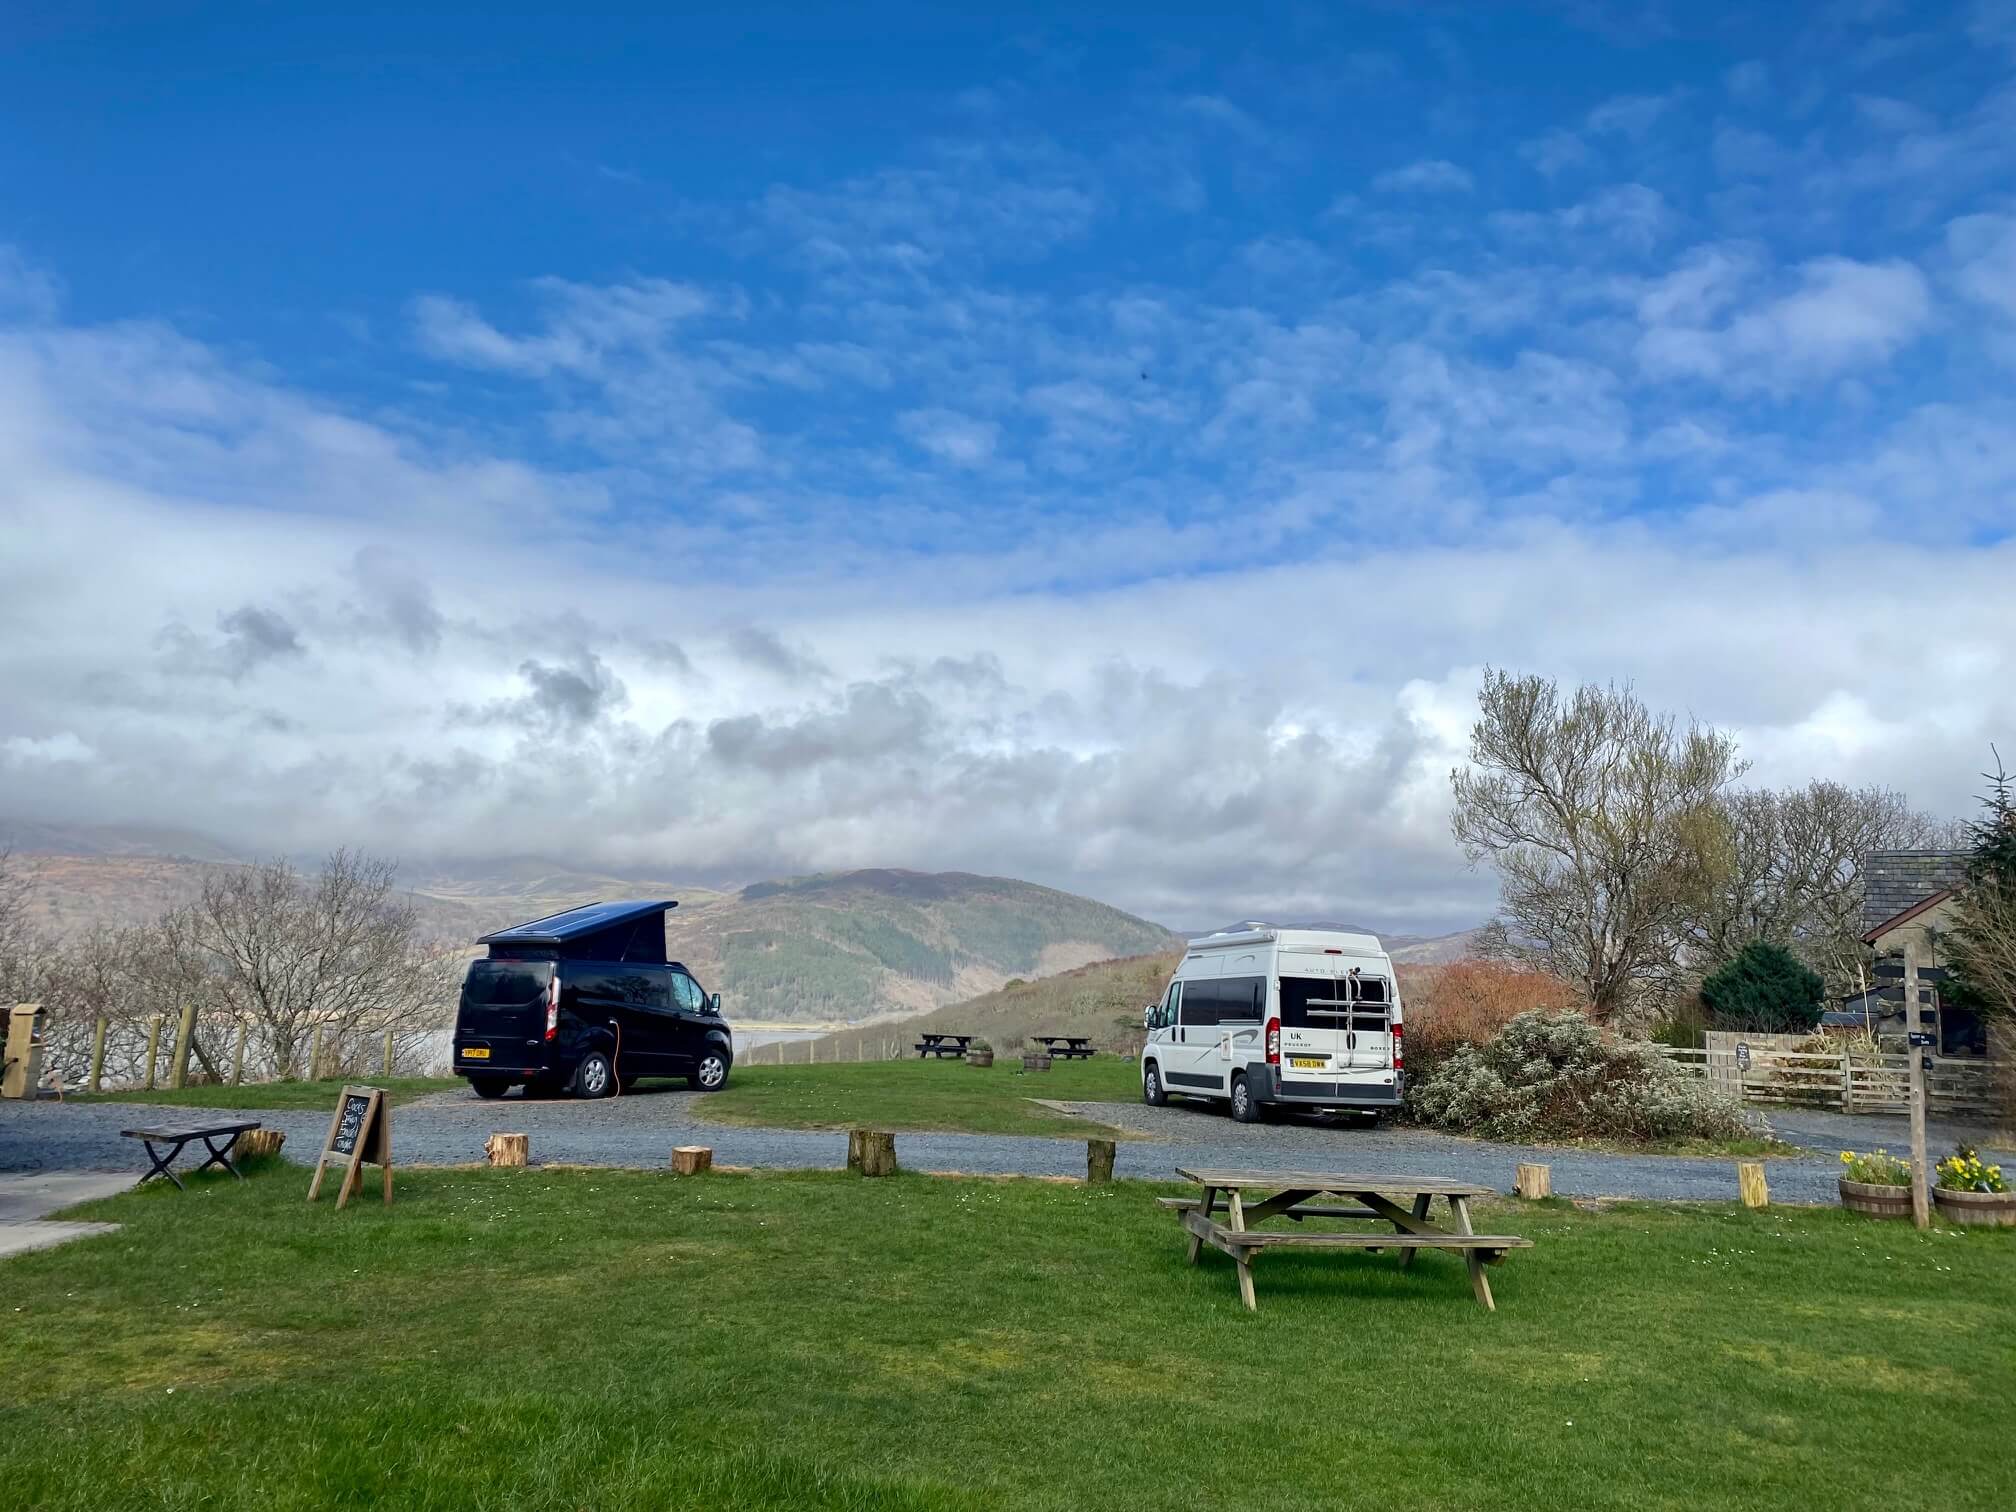 Snowdonia camping site with camper vans